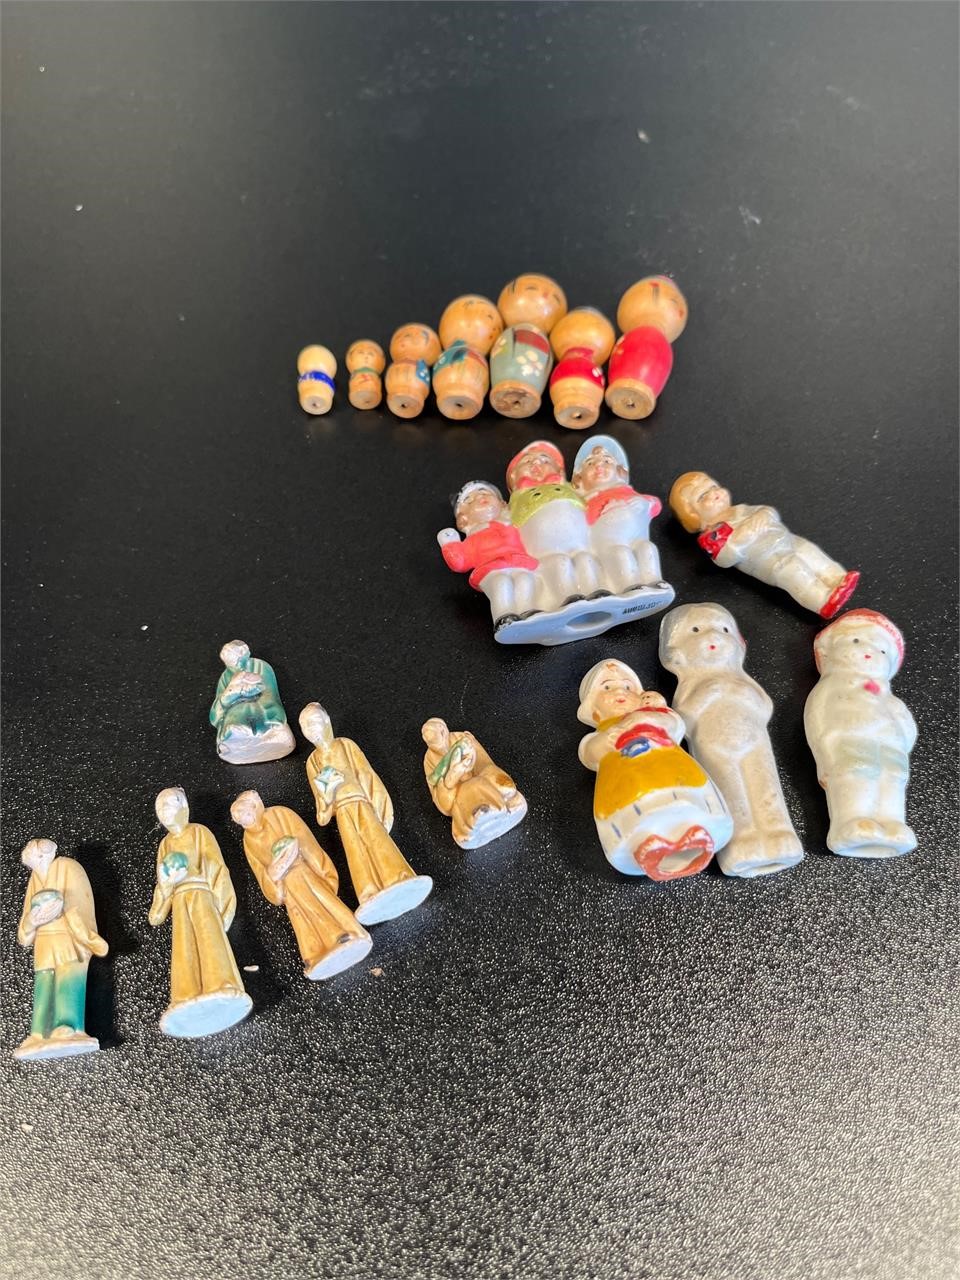 Collection of Miniature Figurines, People, etc.